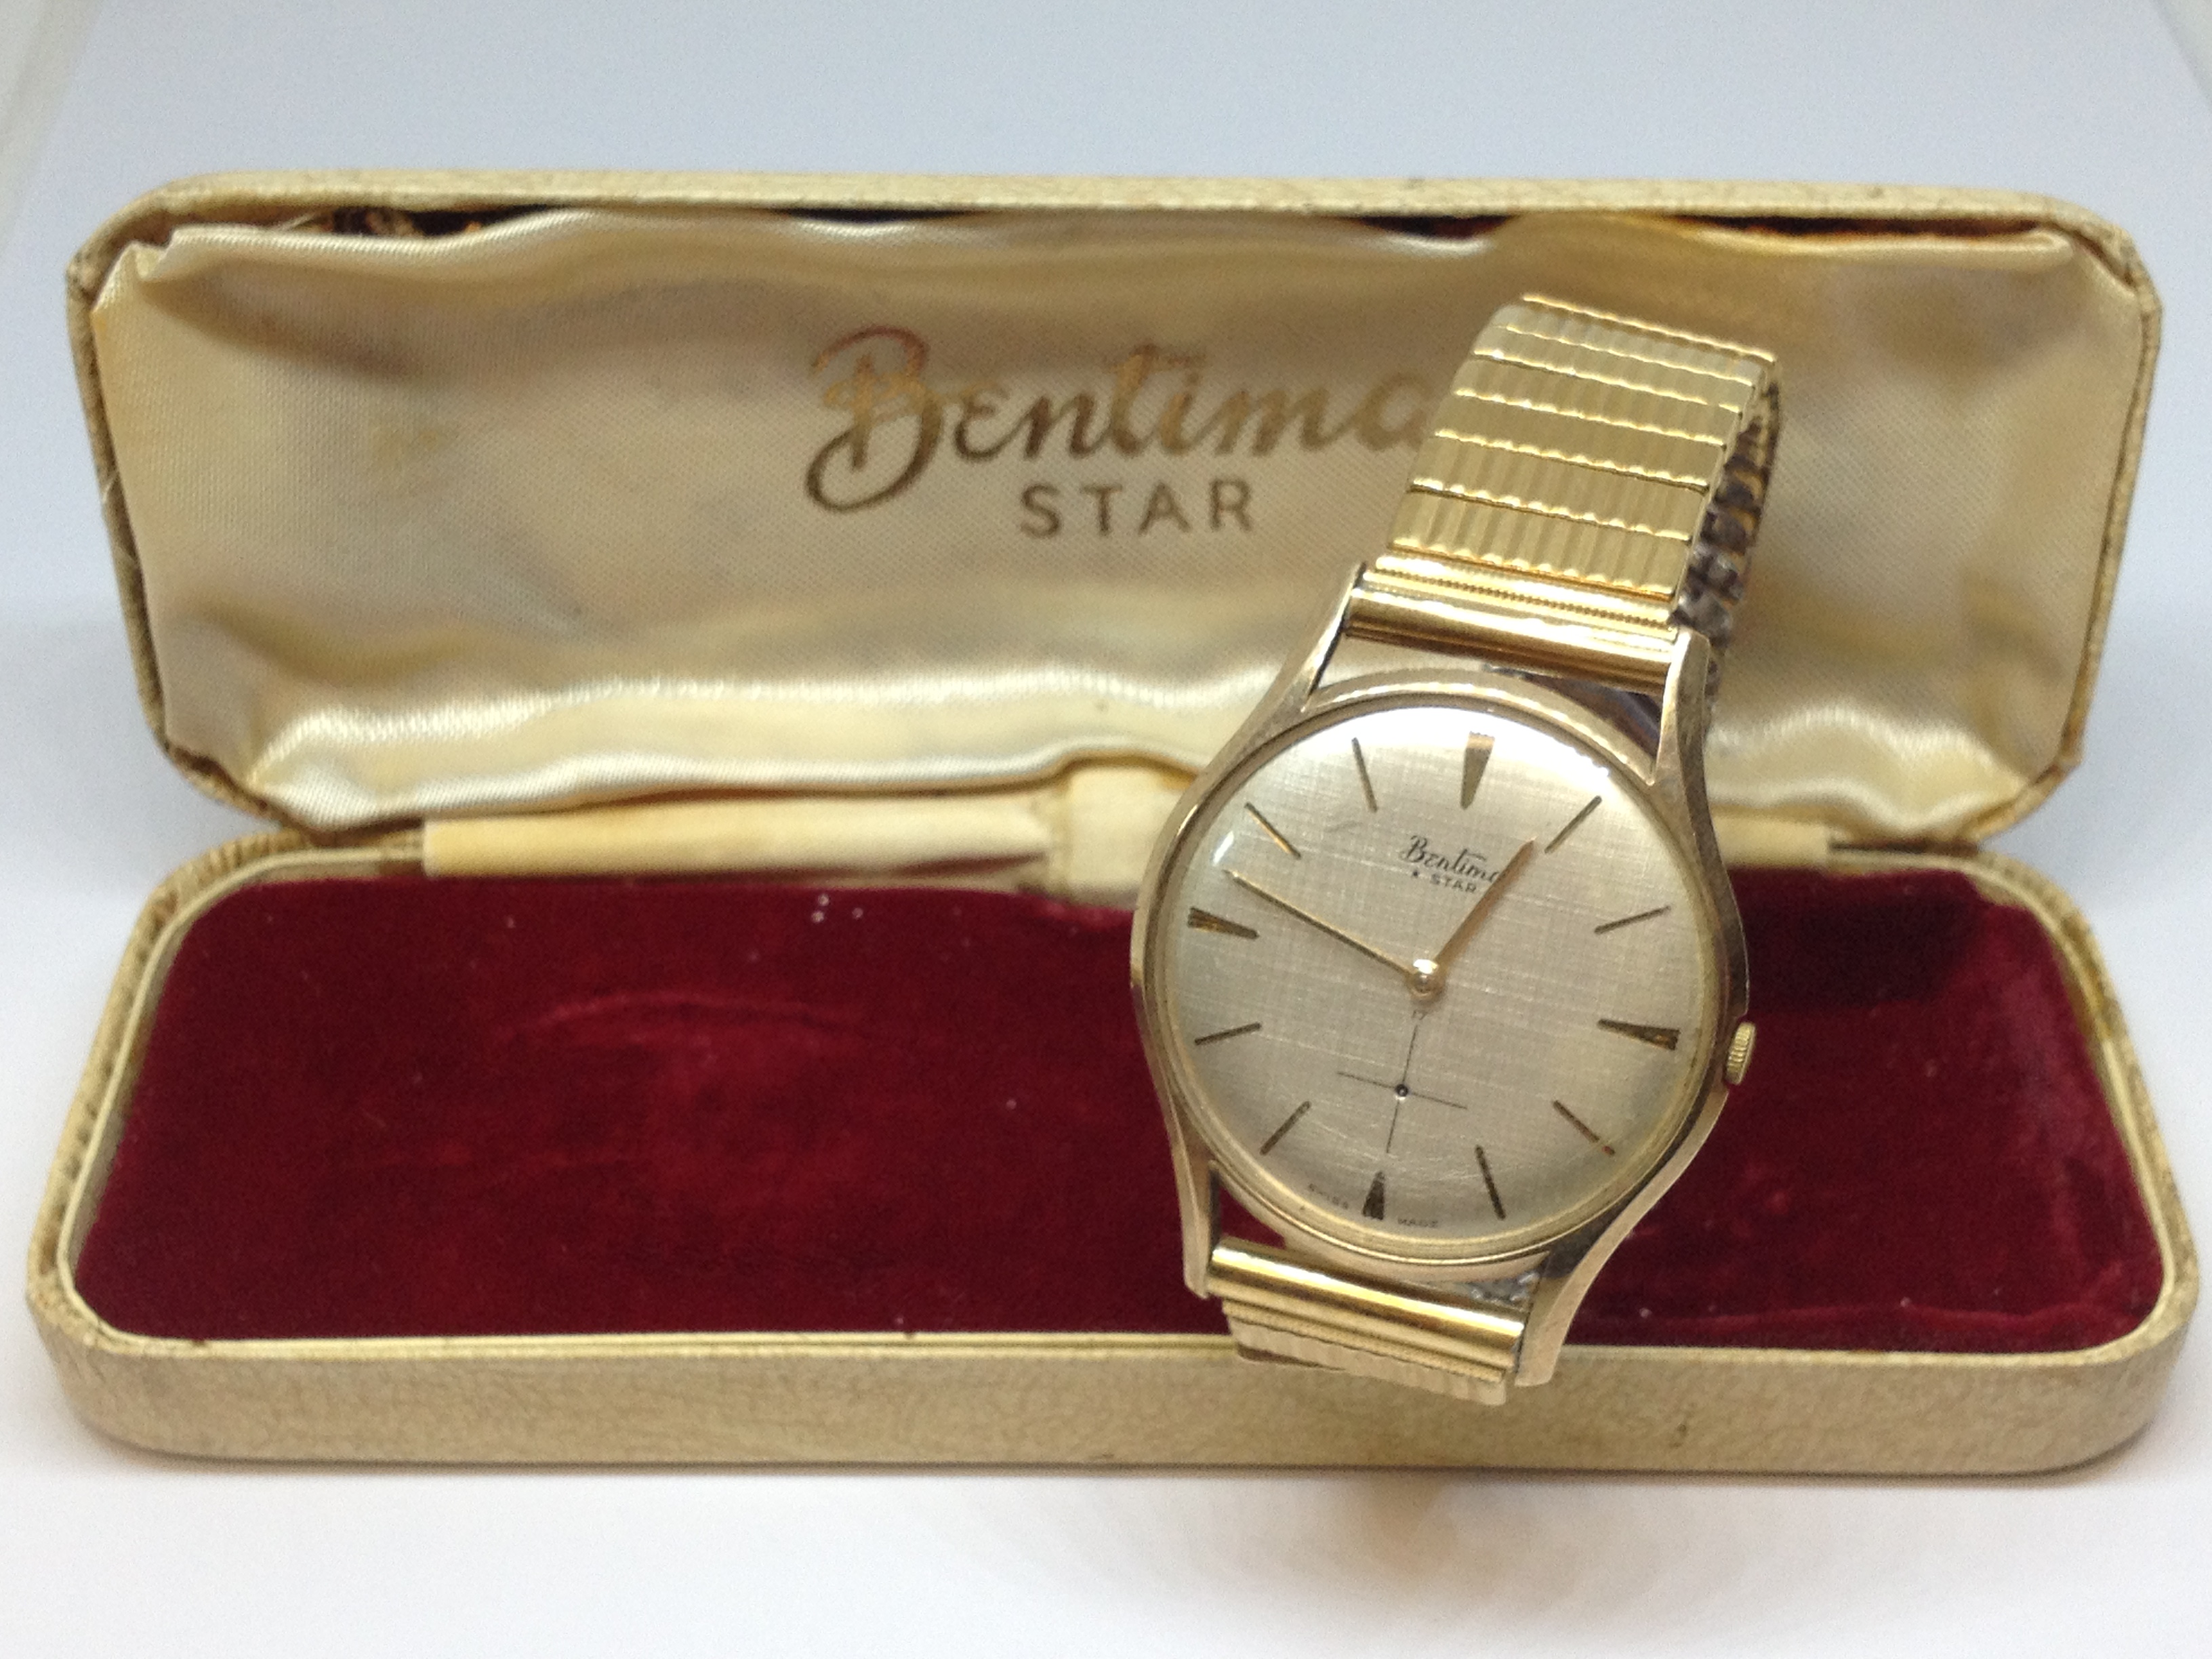 A 9ct gold Bentima star wristwatch, flexi gold plated strap, as found.